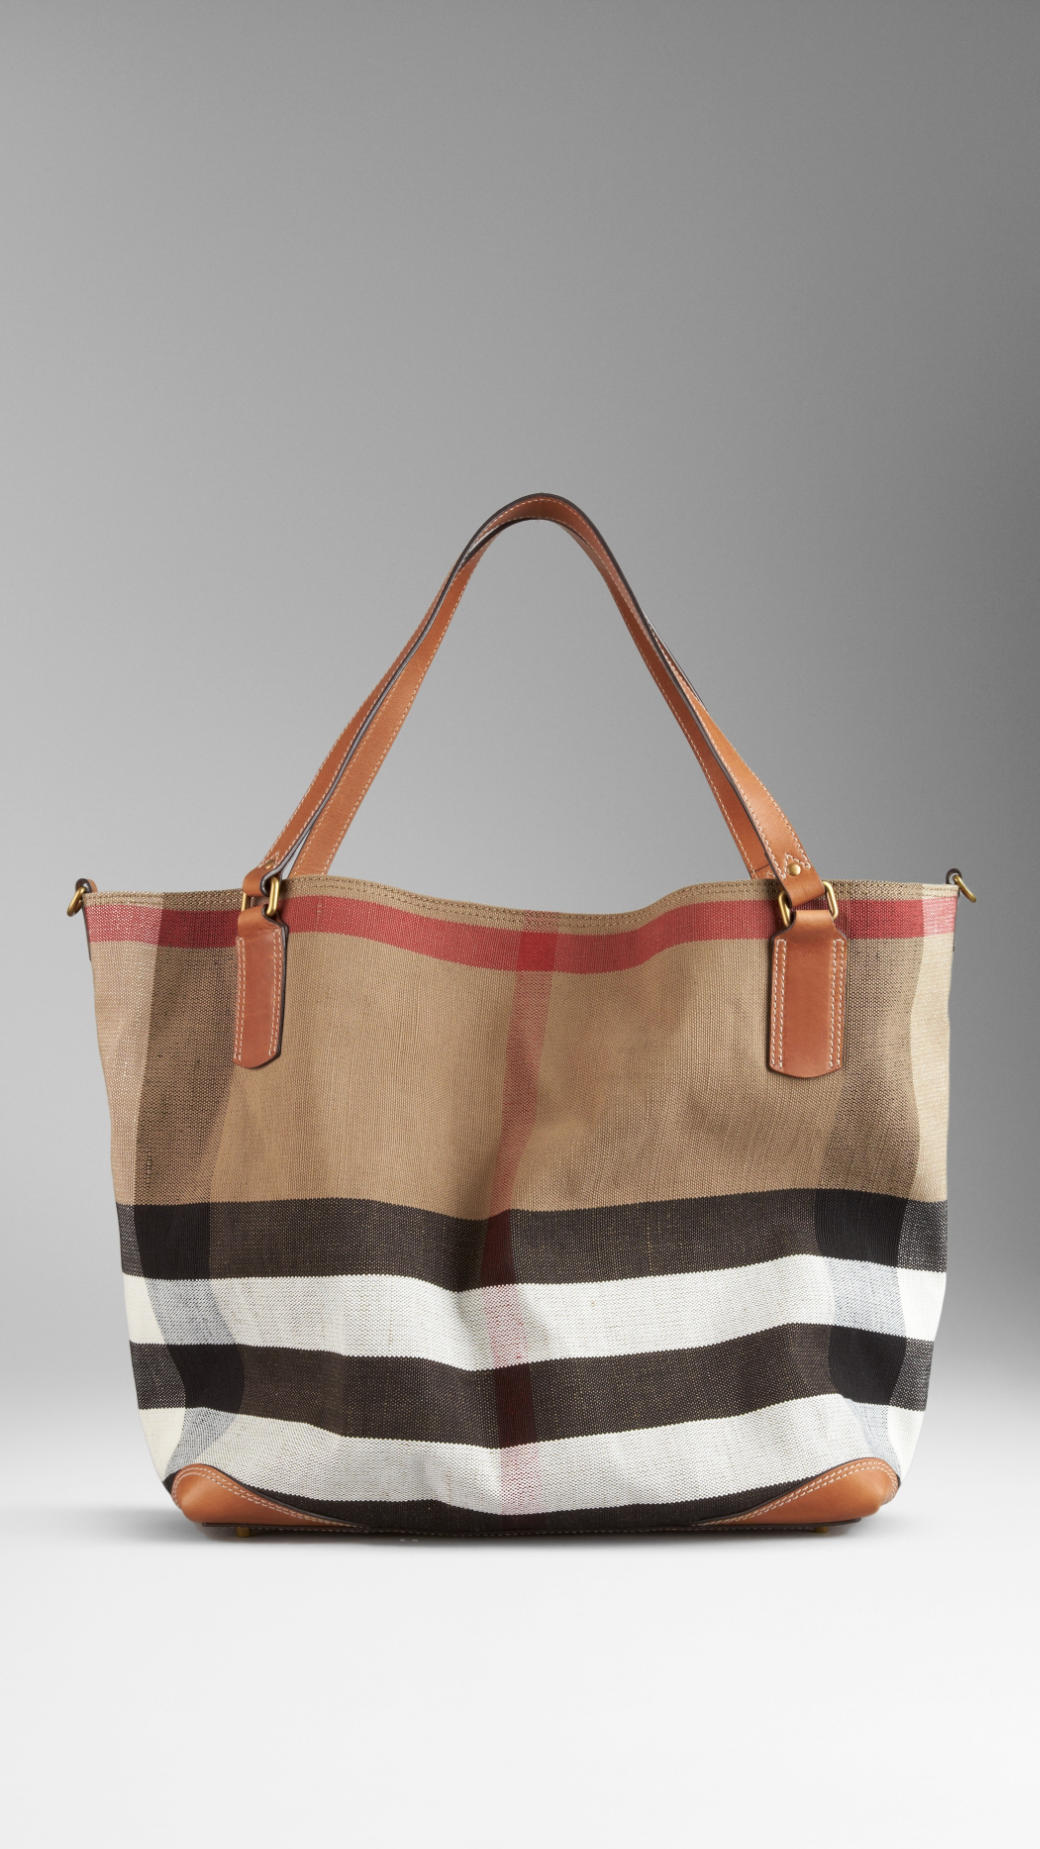 Burberry Brit Large Brit Check Tote Bag in Brown - Lyst